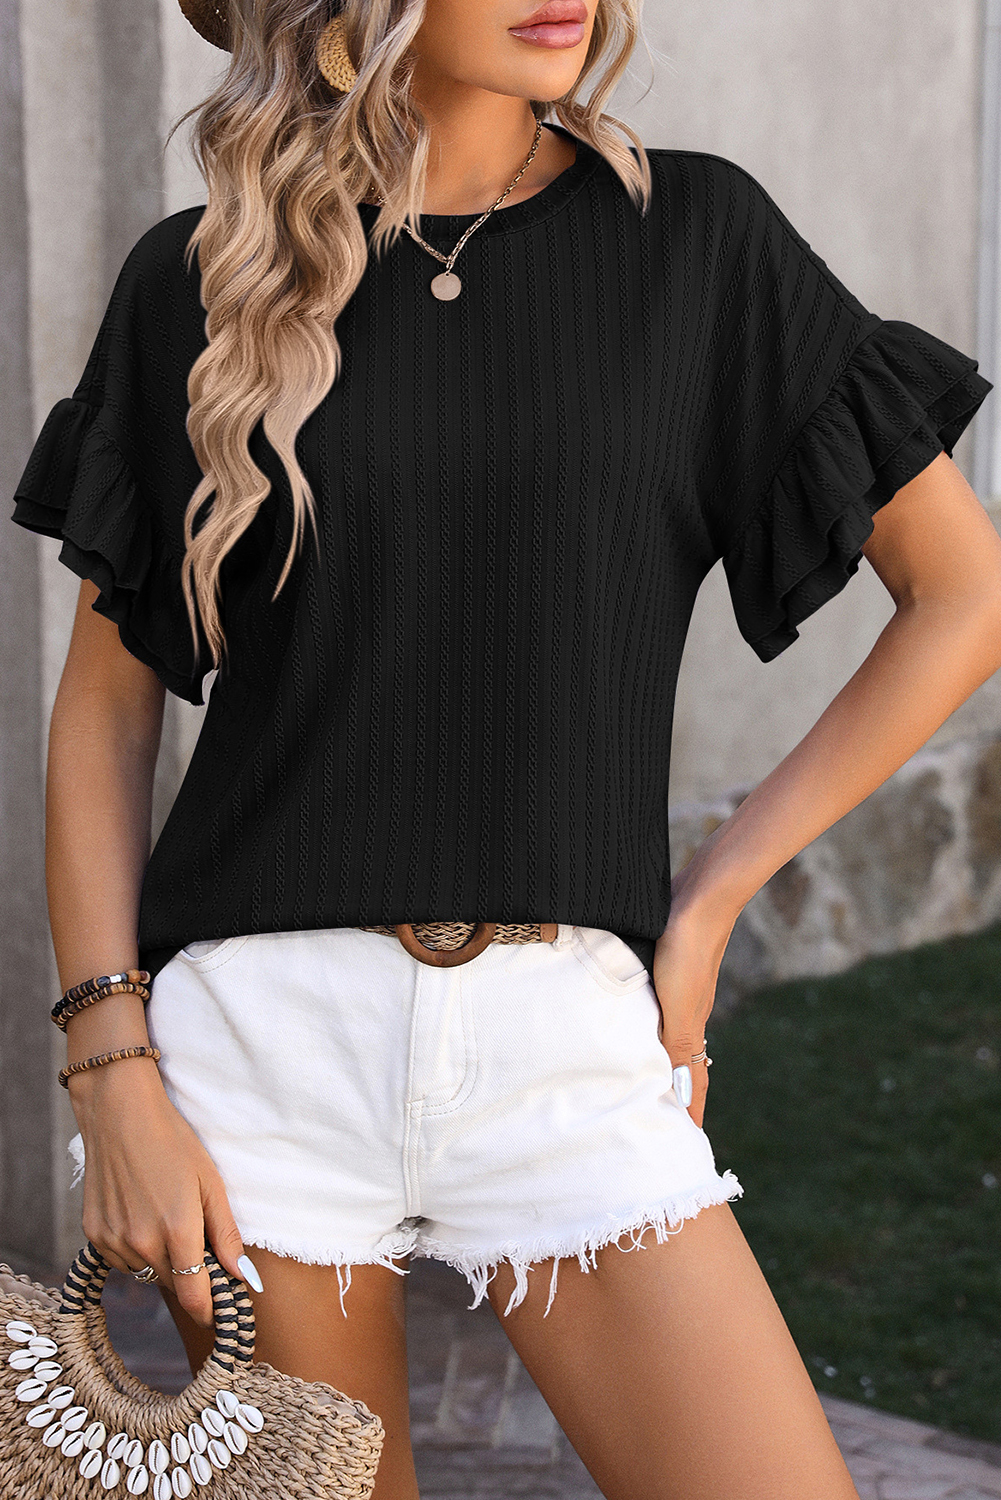 Black Solid Color Textured Layered Ruffle Sleeve T SHIRT